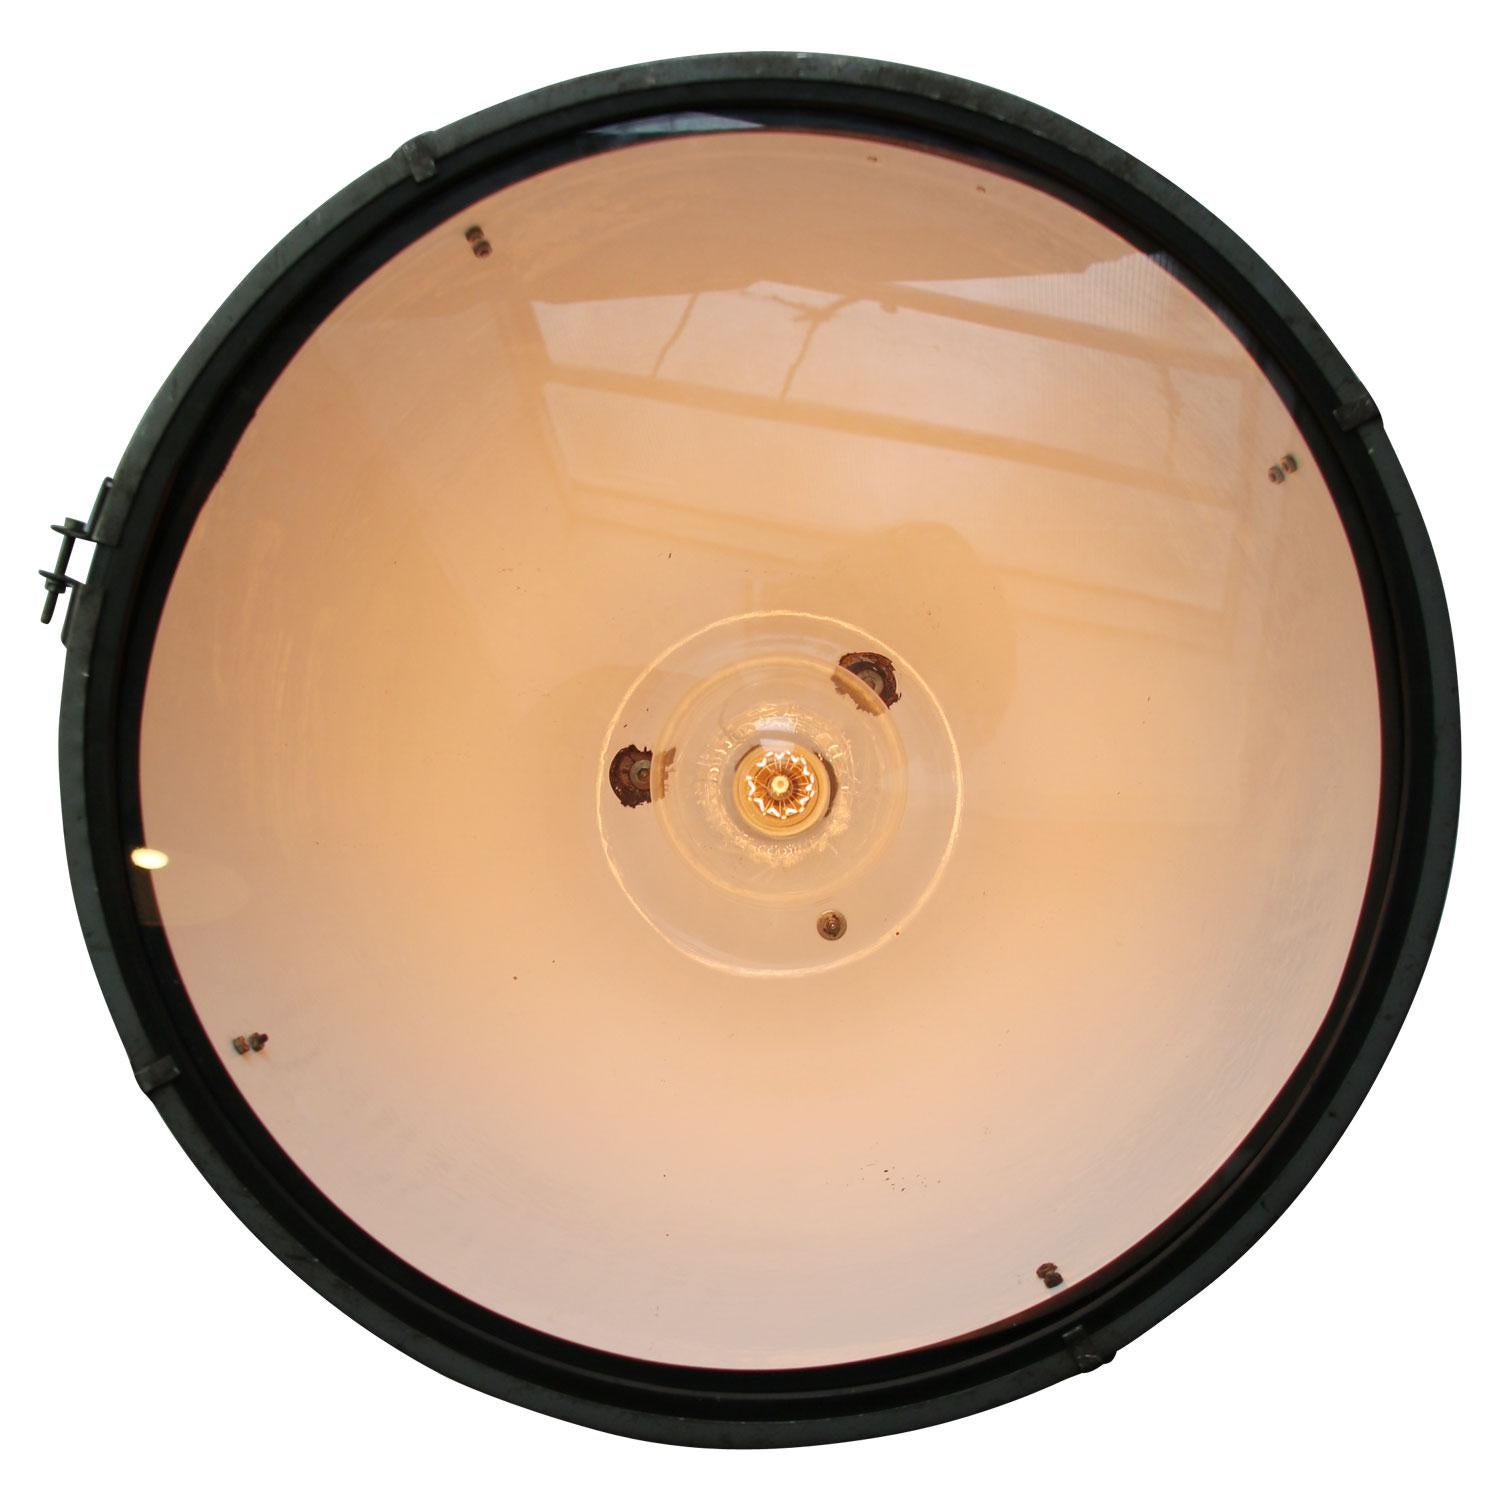 Big Industrial lamp incl. glass
dark brown enamel white interior
clear glass

Weight: 12.00 kg / 26.5 lb

Priced per individual item. All lamps have been made suitable by international standards for incandescent light bulbs, energy-efficient and LED